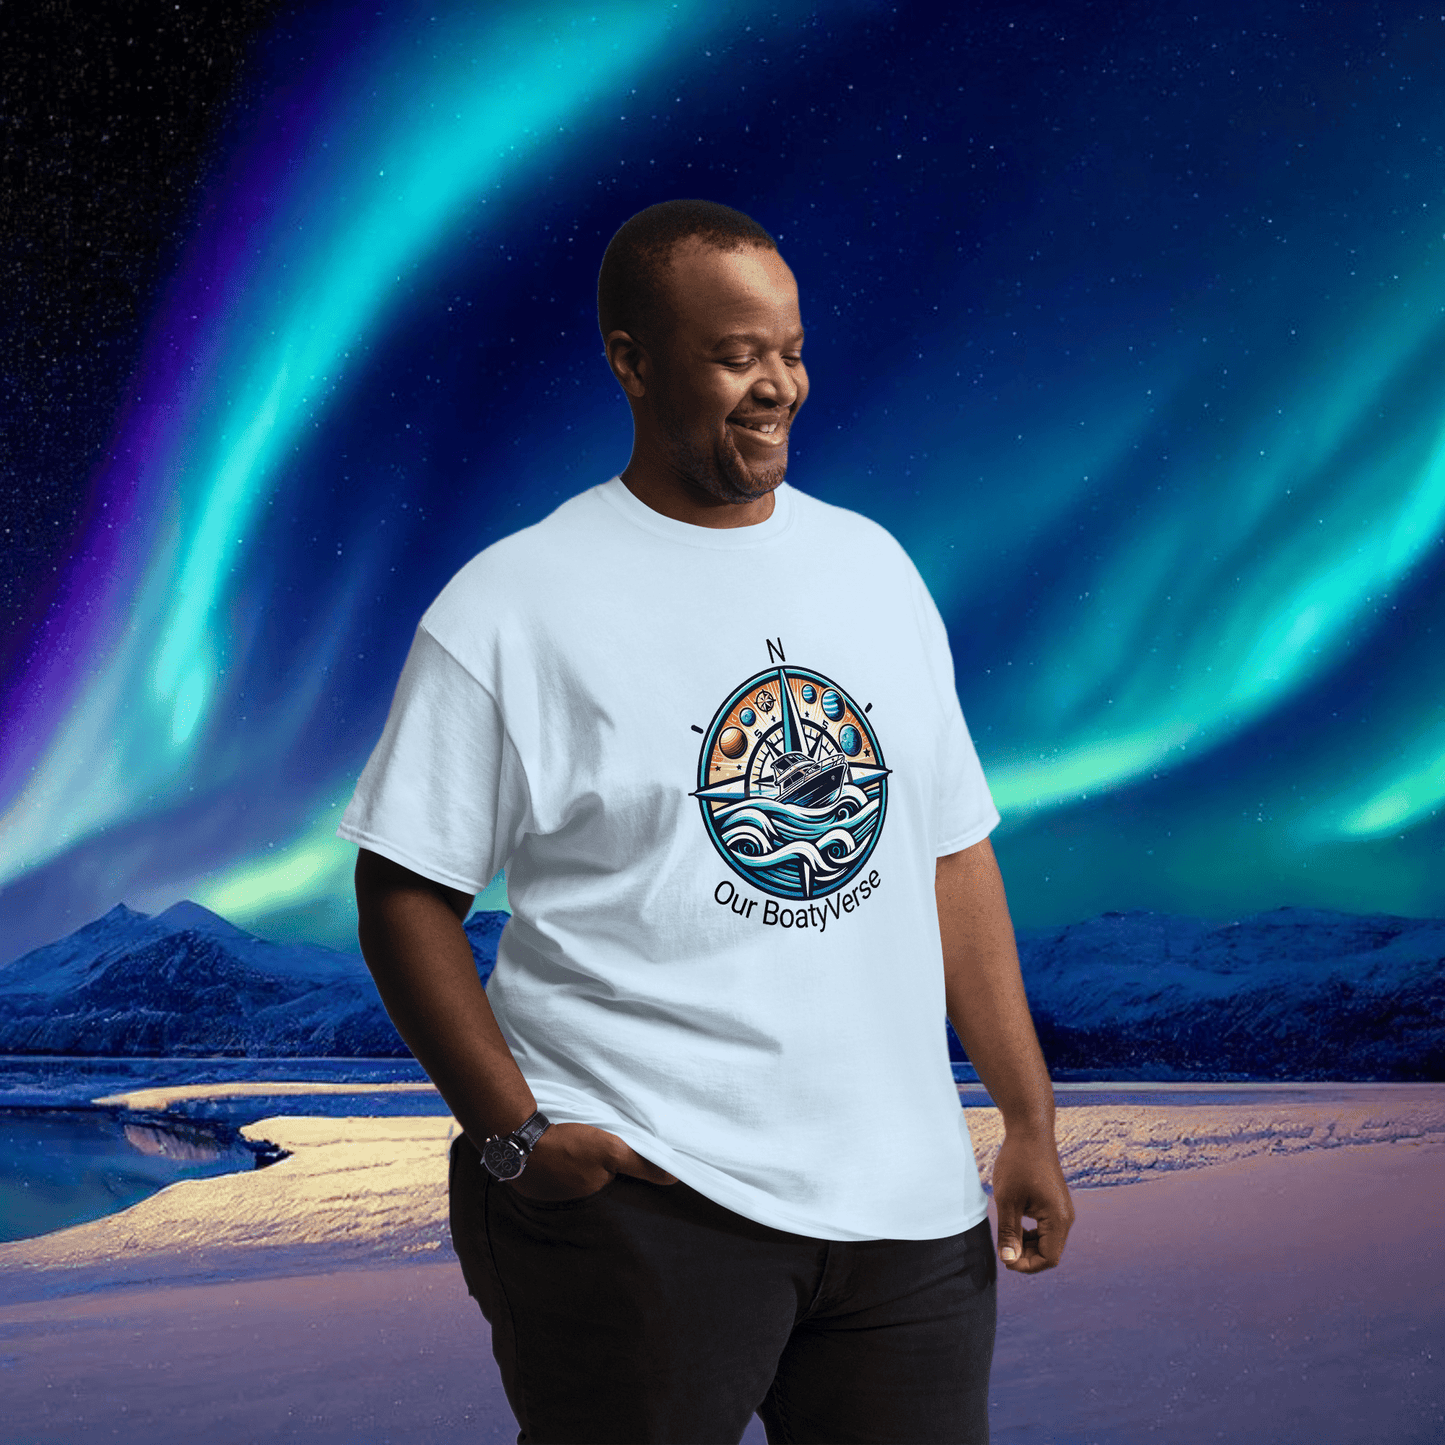 Can you feel the BoatyVerse? Men's cotton T-Shirt by Our BoatyVerse